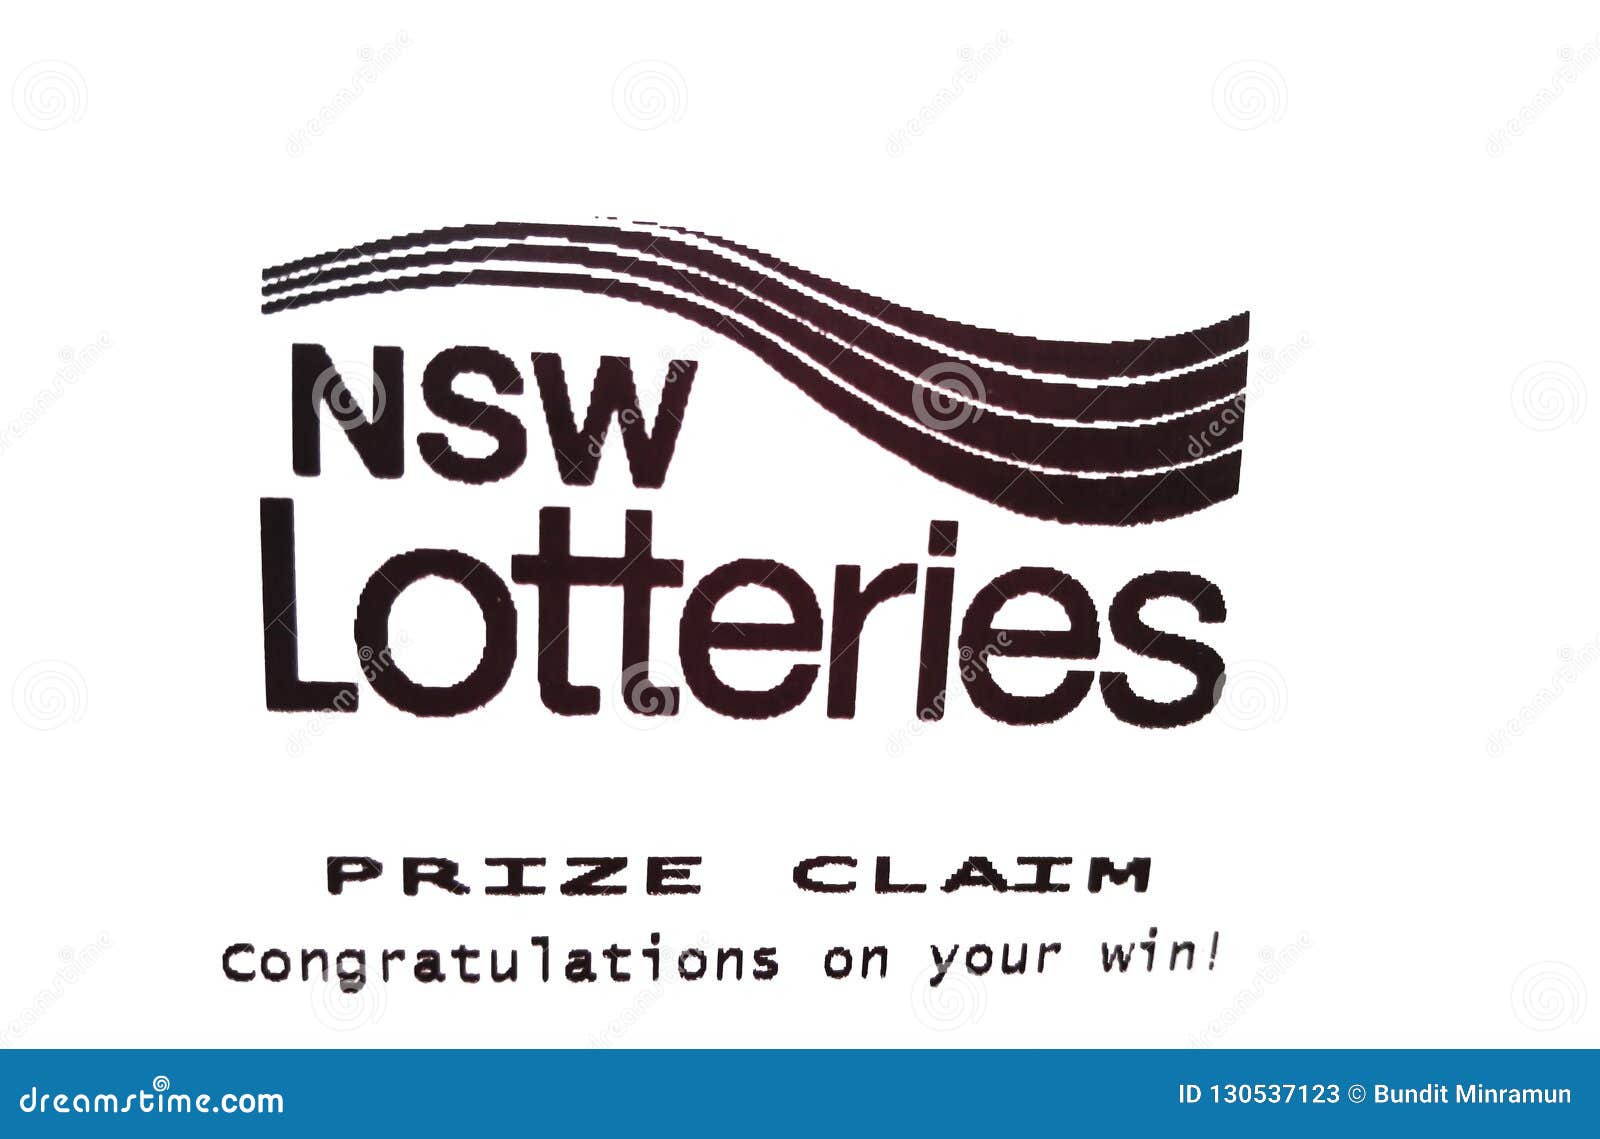 New South Wales Lottery